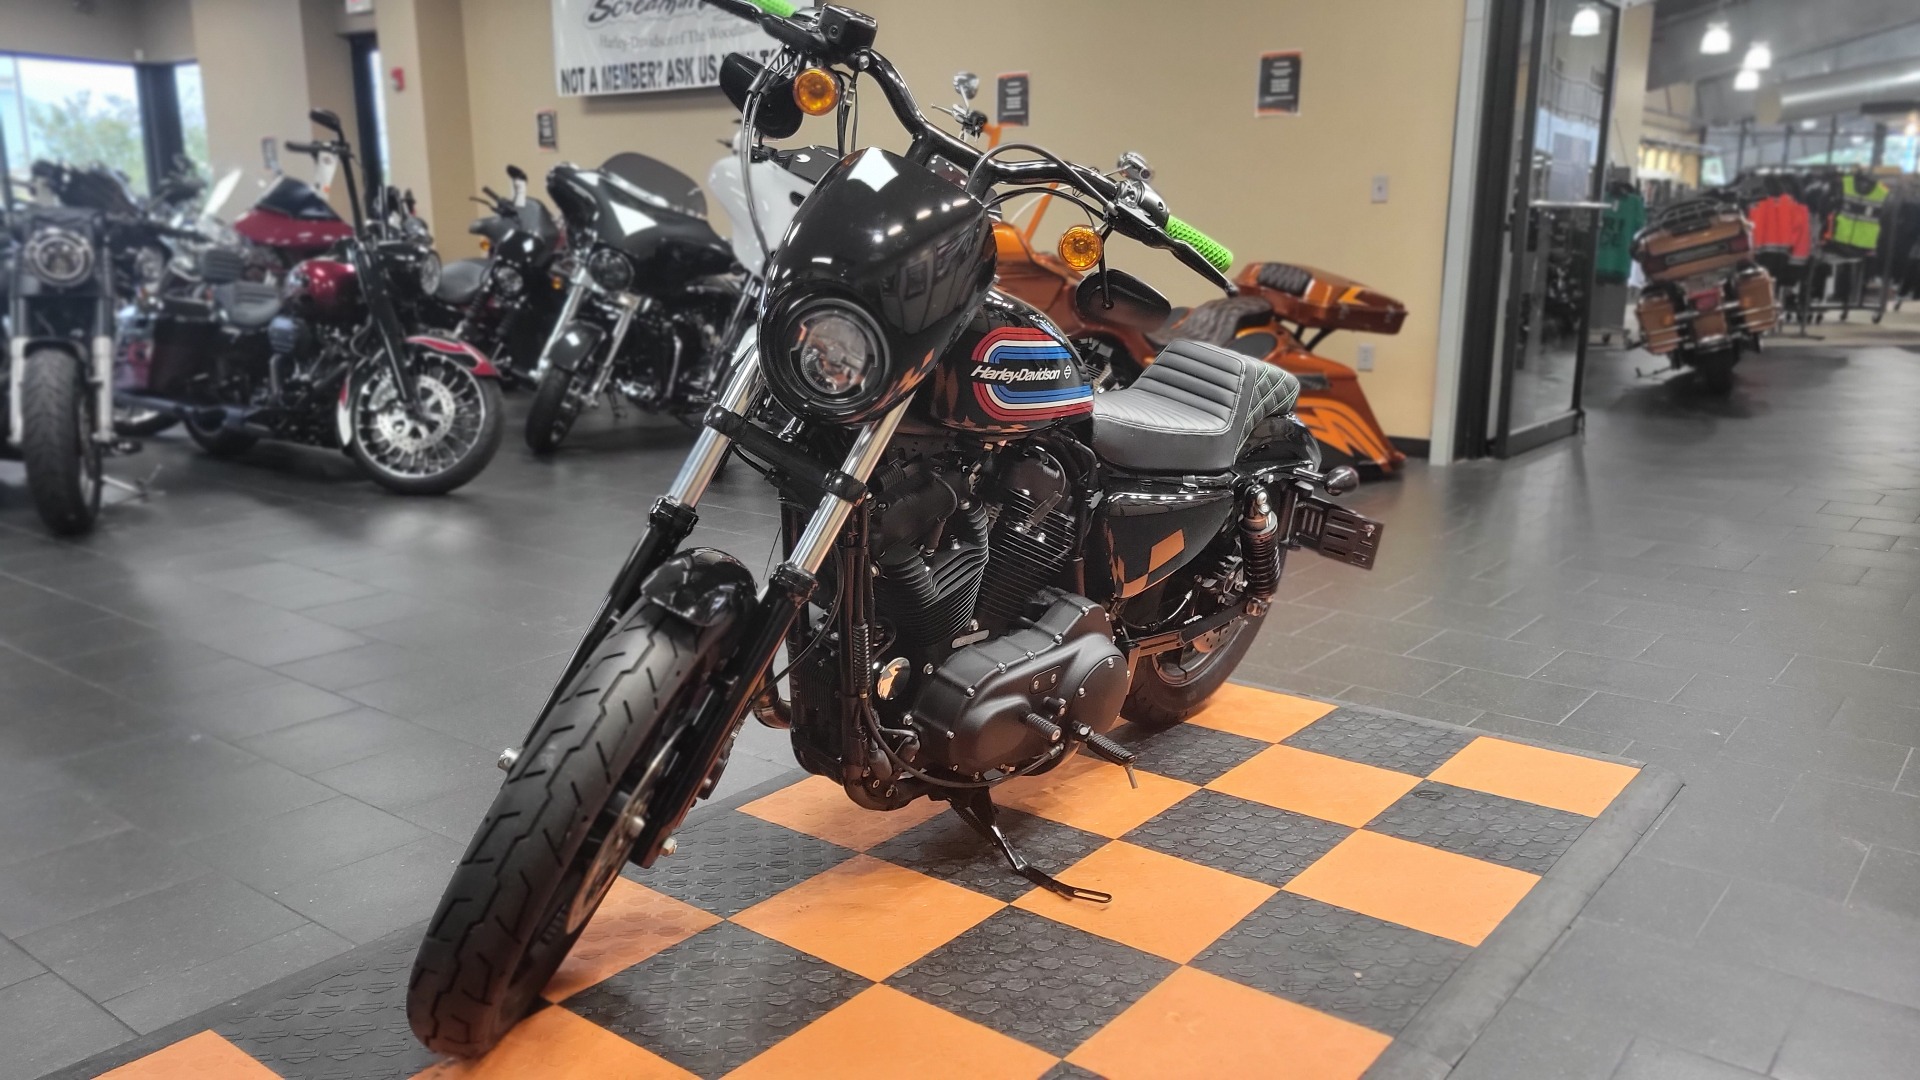 2021 Harley-Davidson Iron 1200™ in The Woodlands, Texas - Photo 3